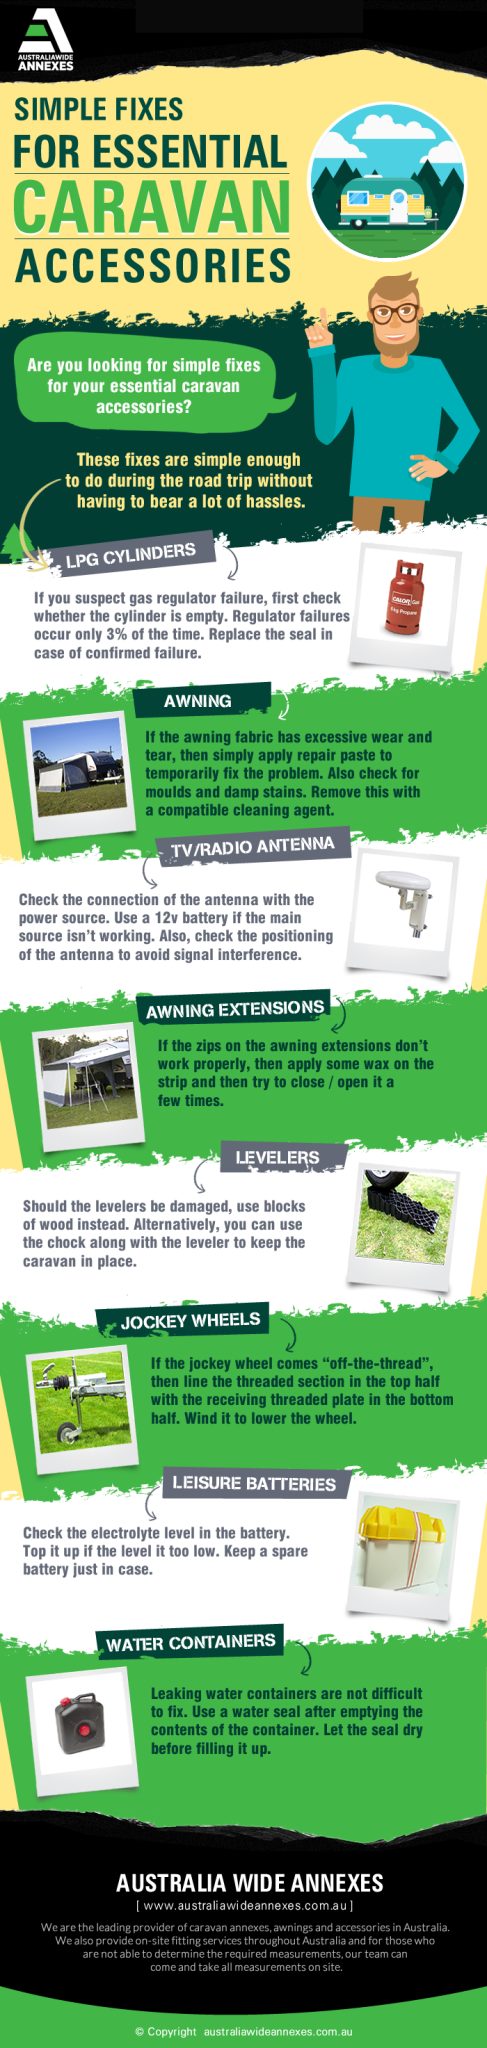 Simple Fixes for Essential Caravan Accessories - AWA Infographic 